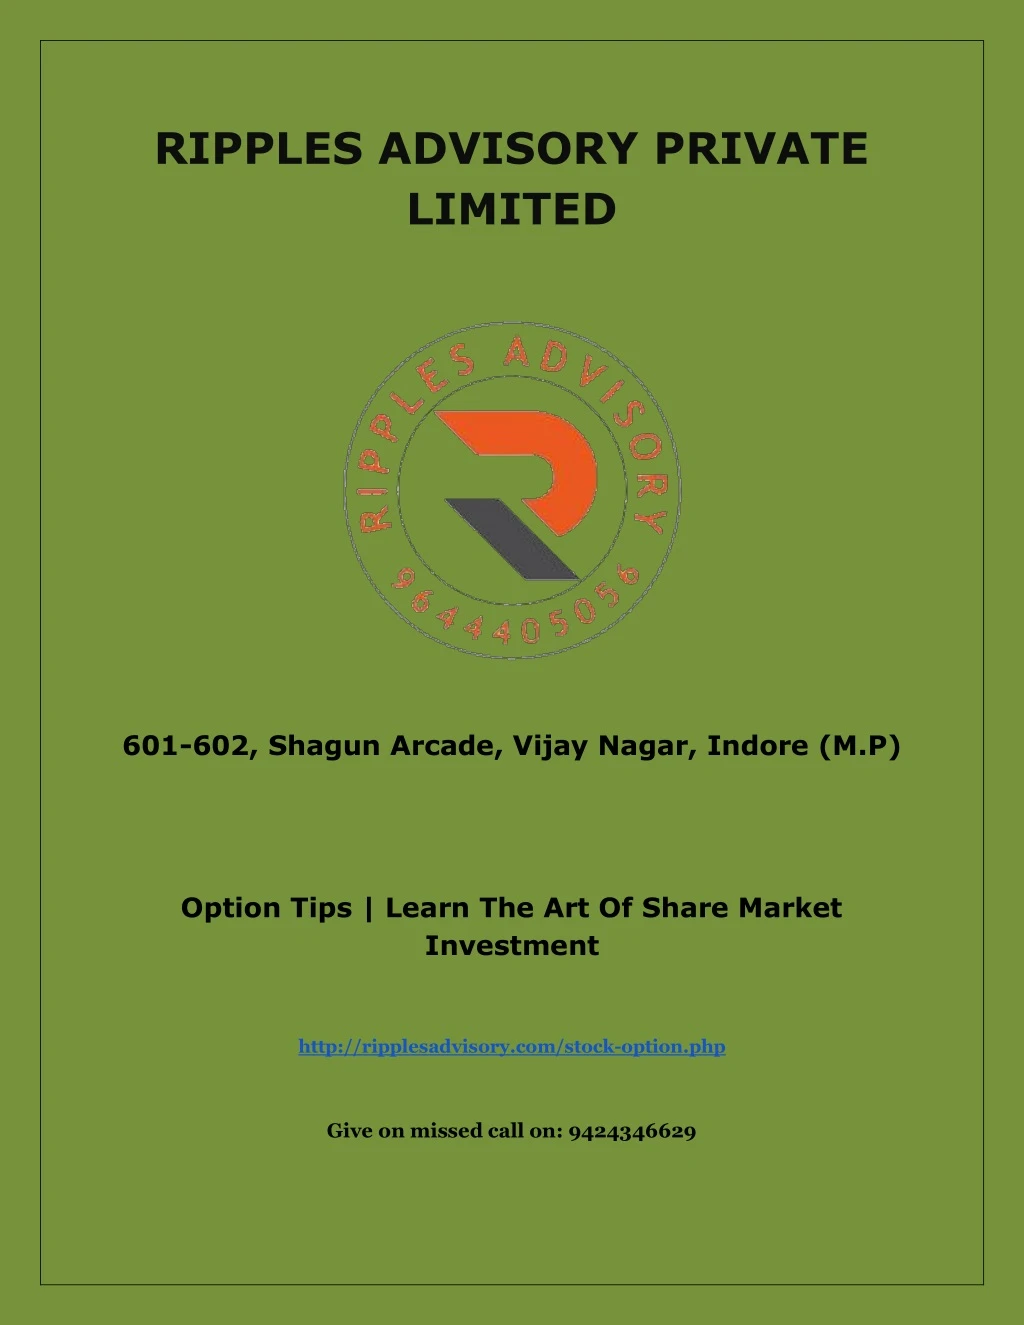 ripples advisory private limited